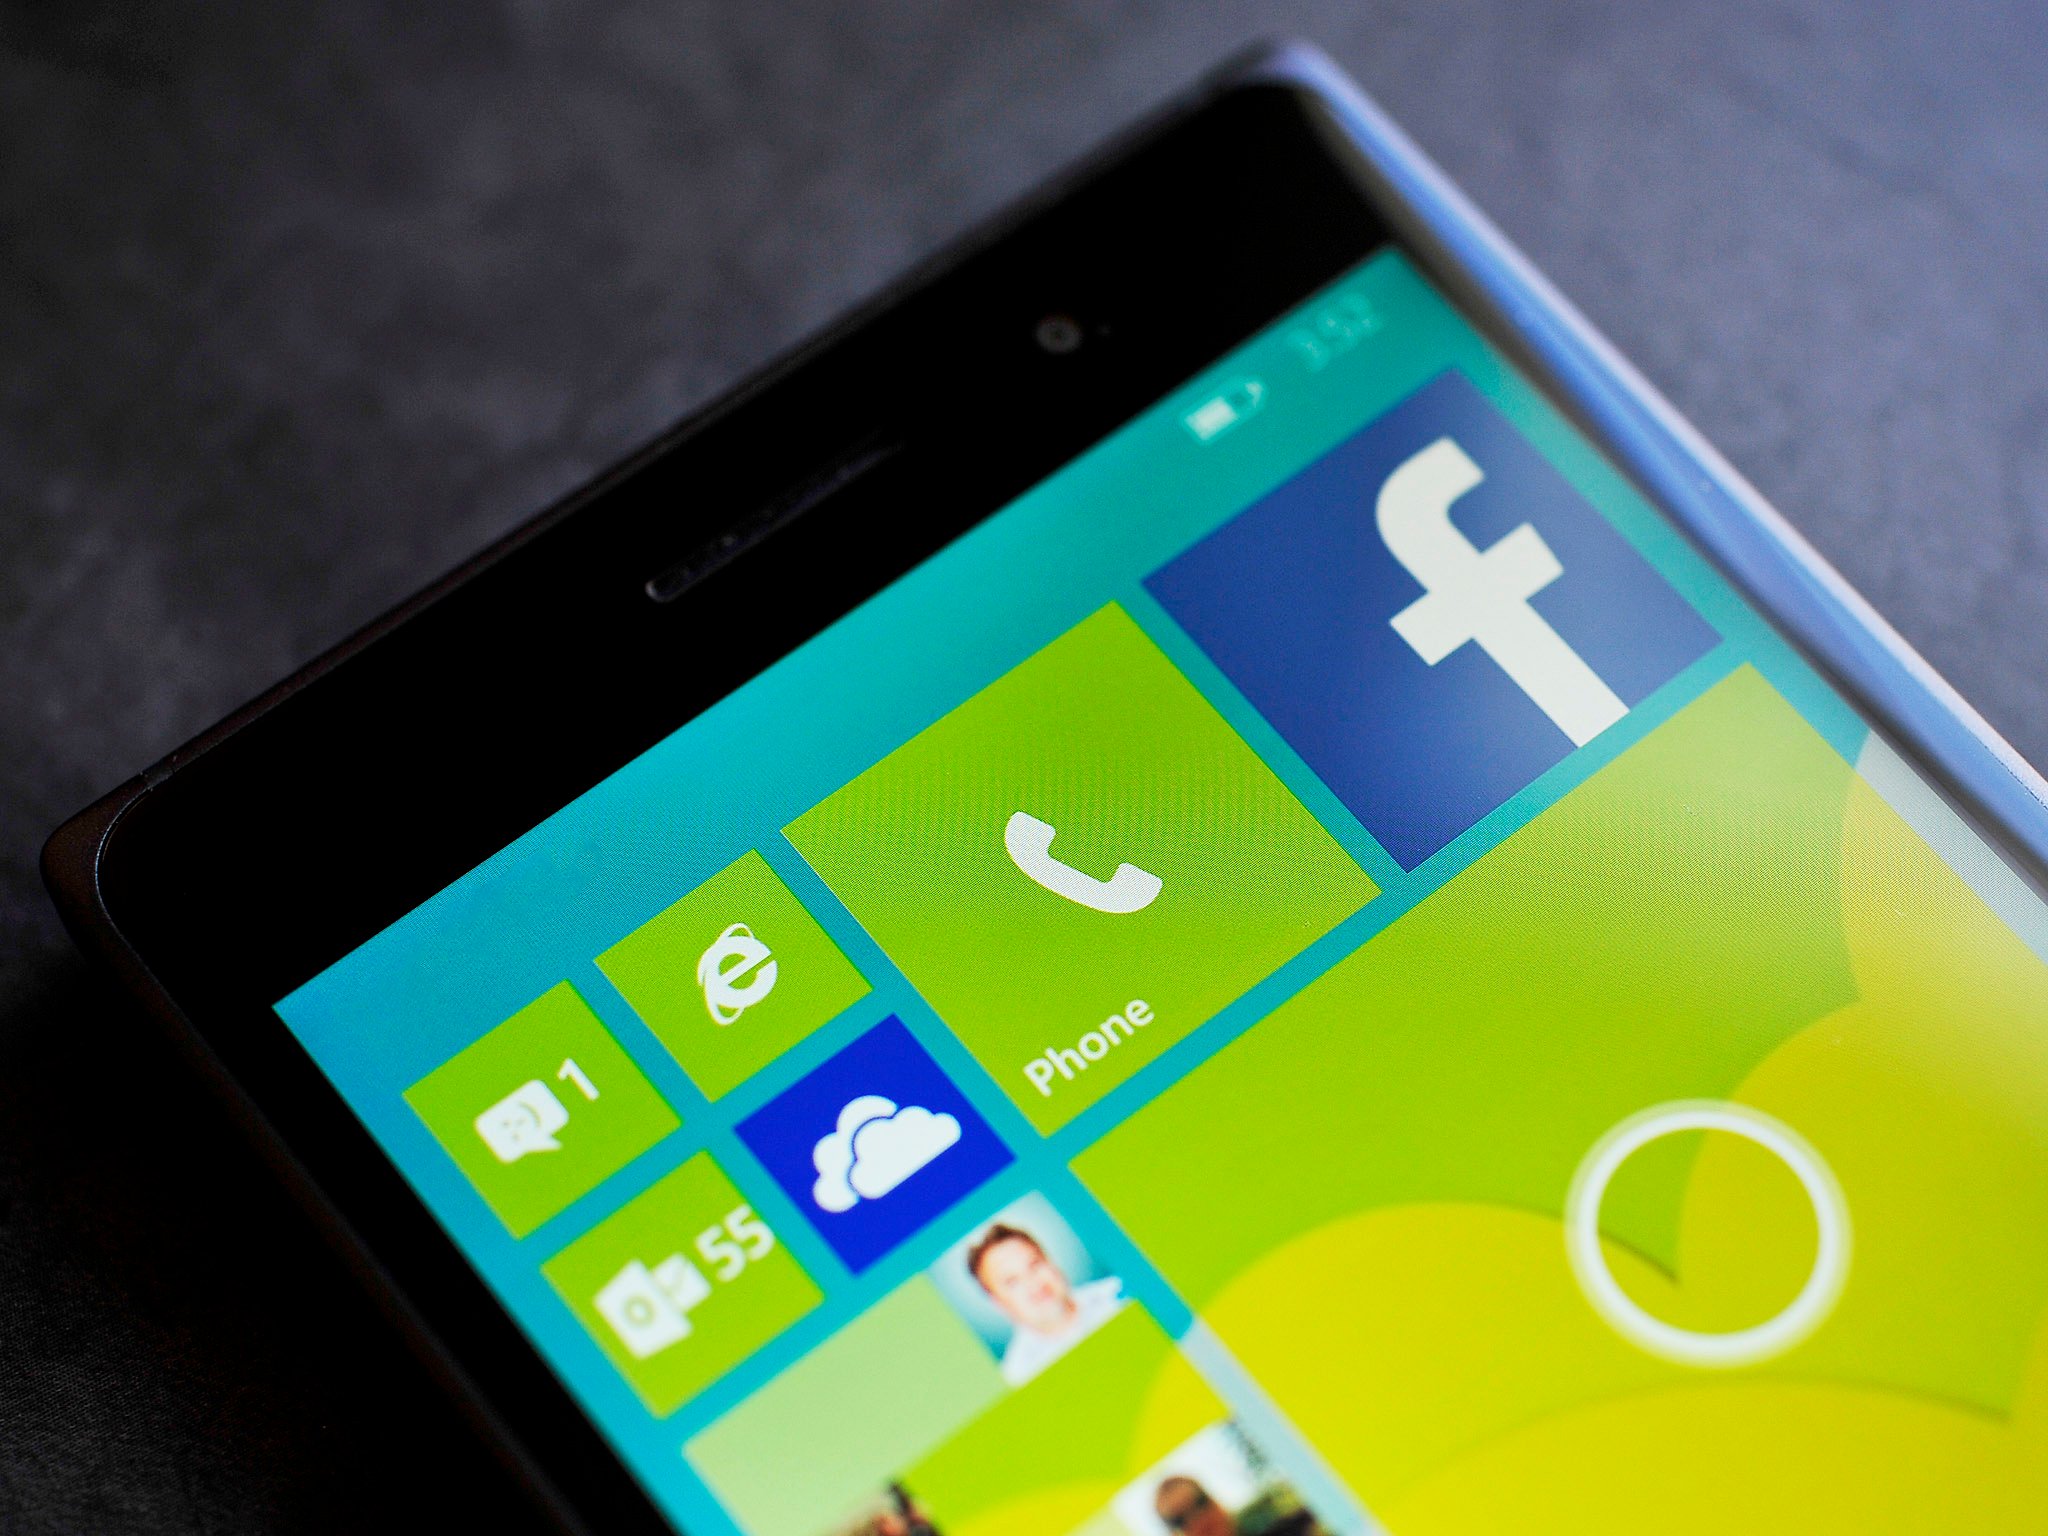 Next Windows 10 for phones build will expand to a massive number of devices